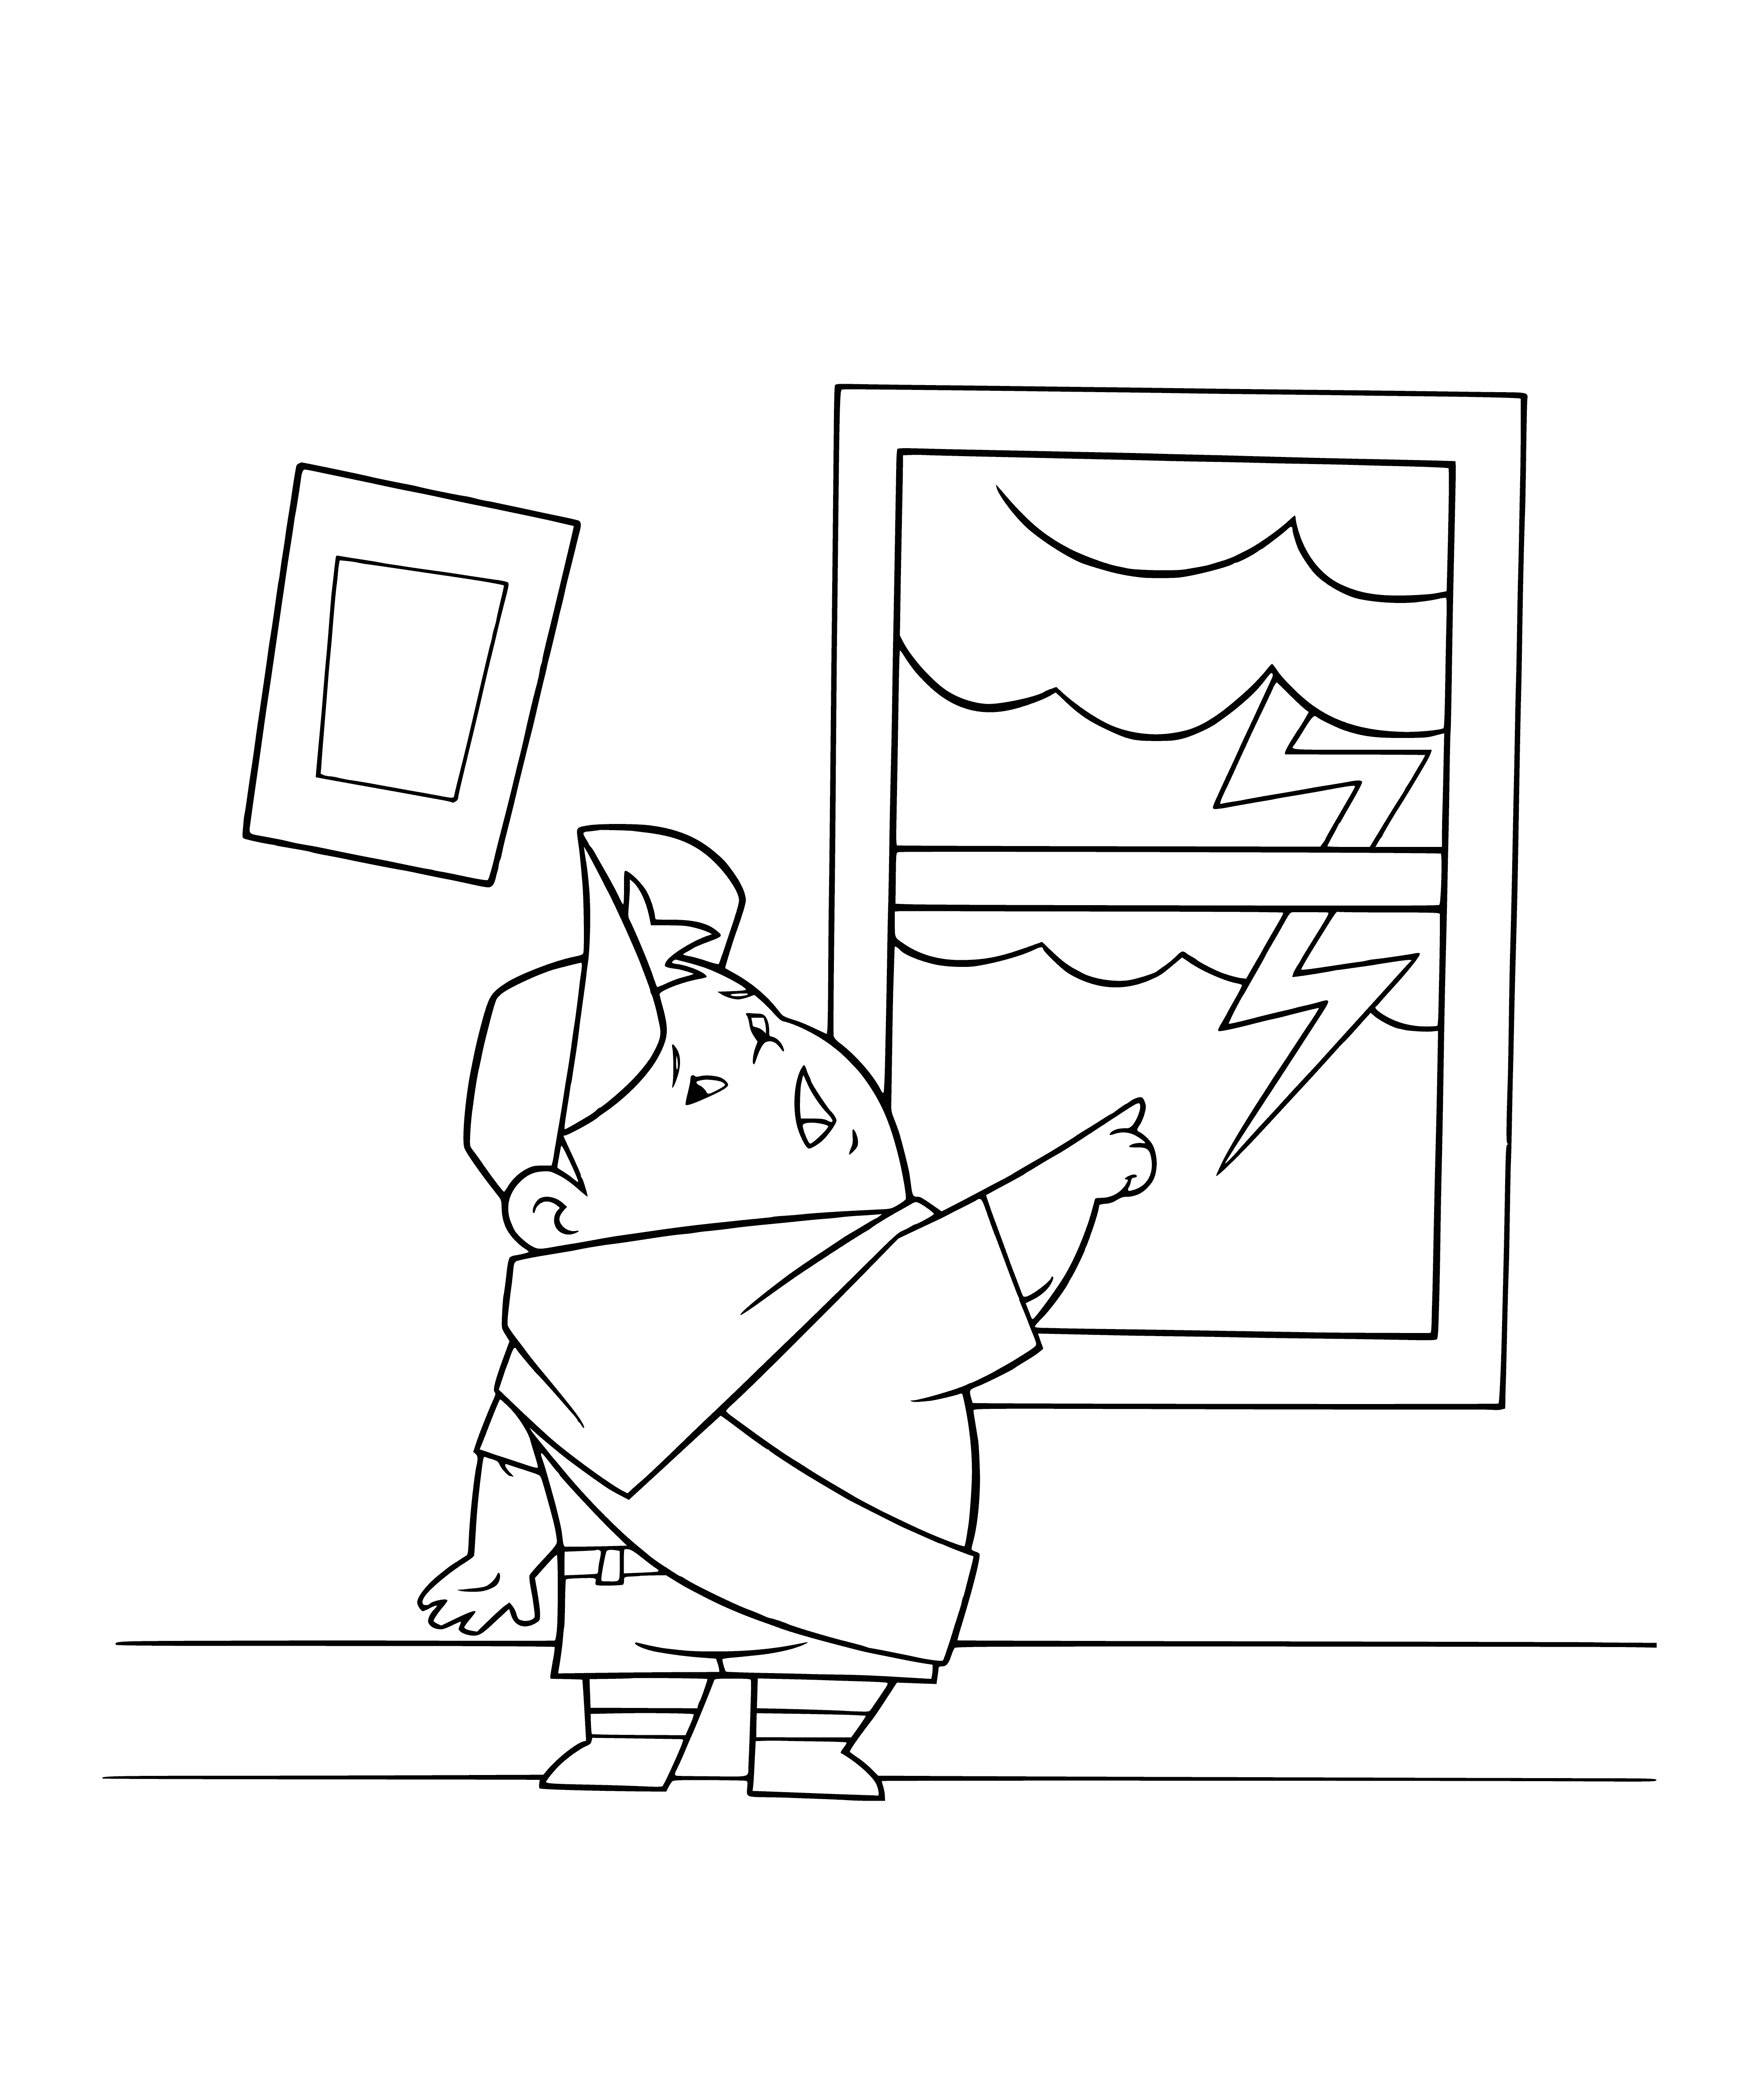 coloring page: Dog tied to balloon, unhappy, above them a big dark storm cloud.